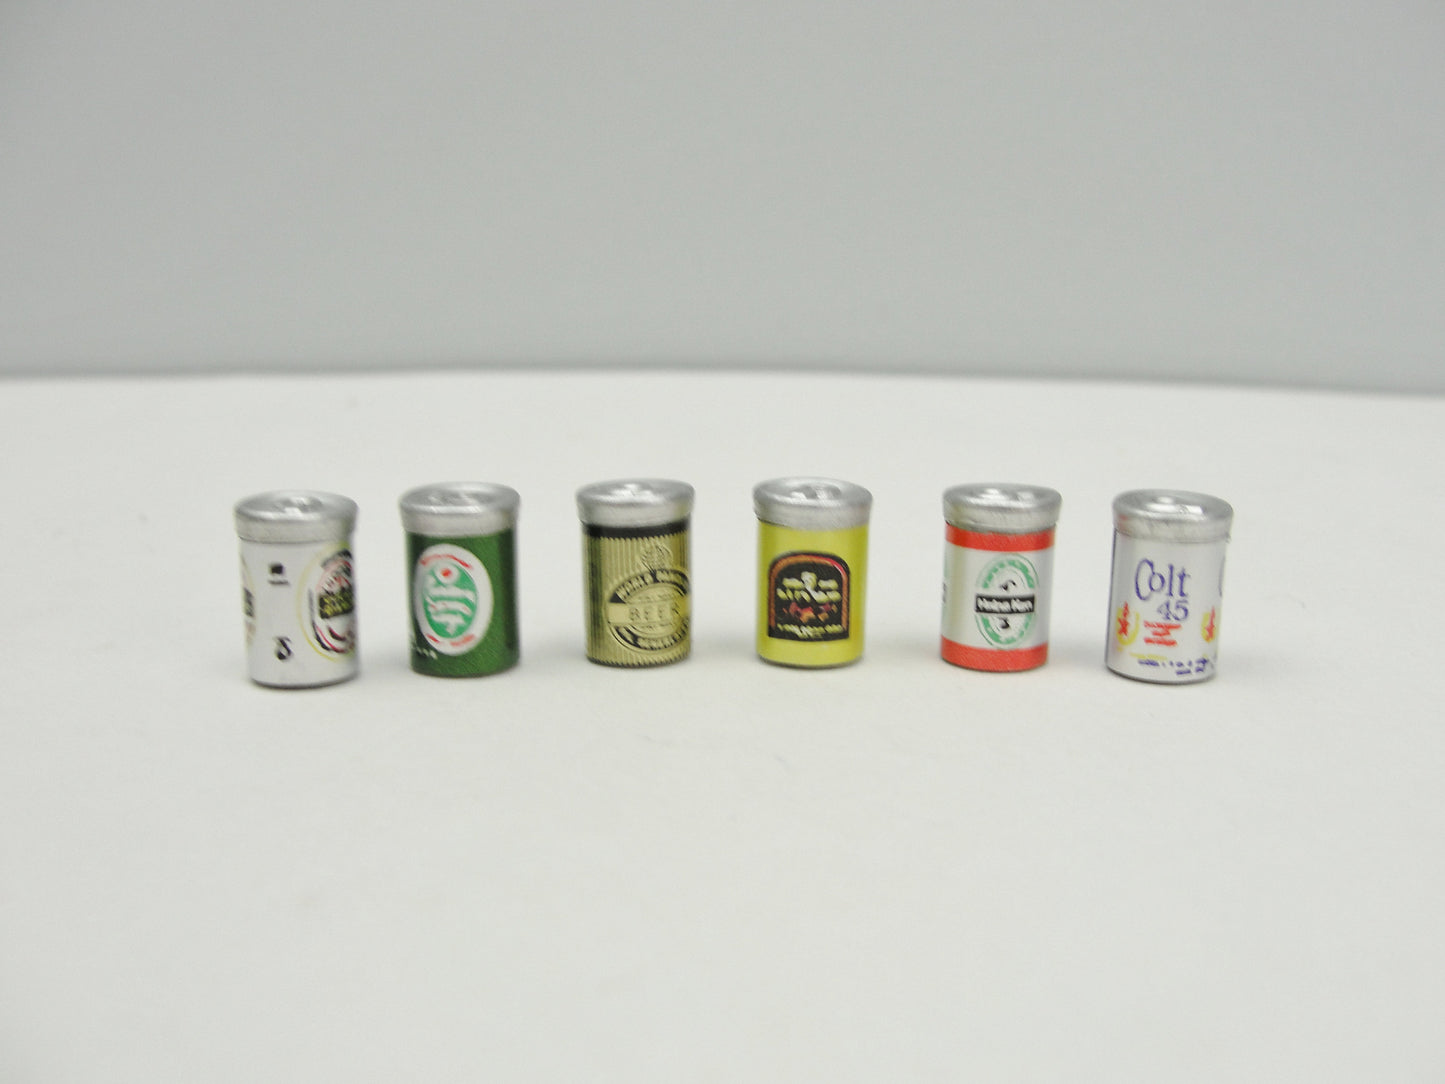 Dollhouse beer cans set of 6 - Miniatures - Craft Supply House